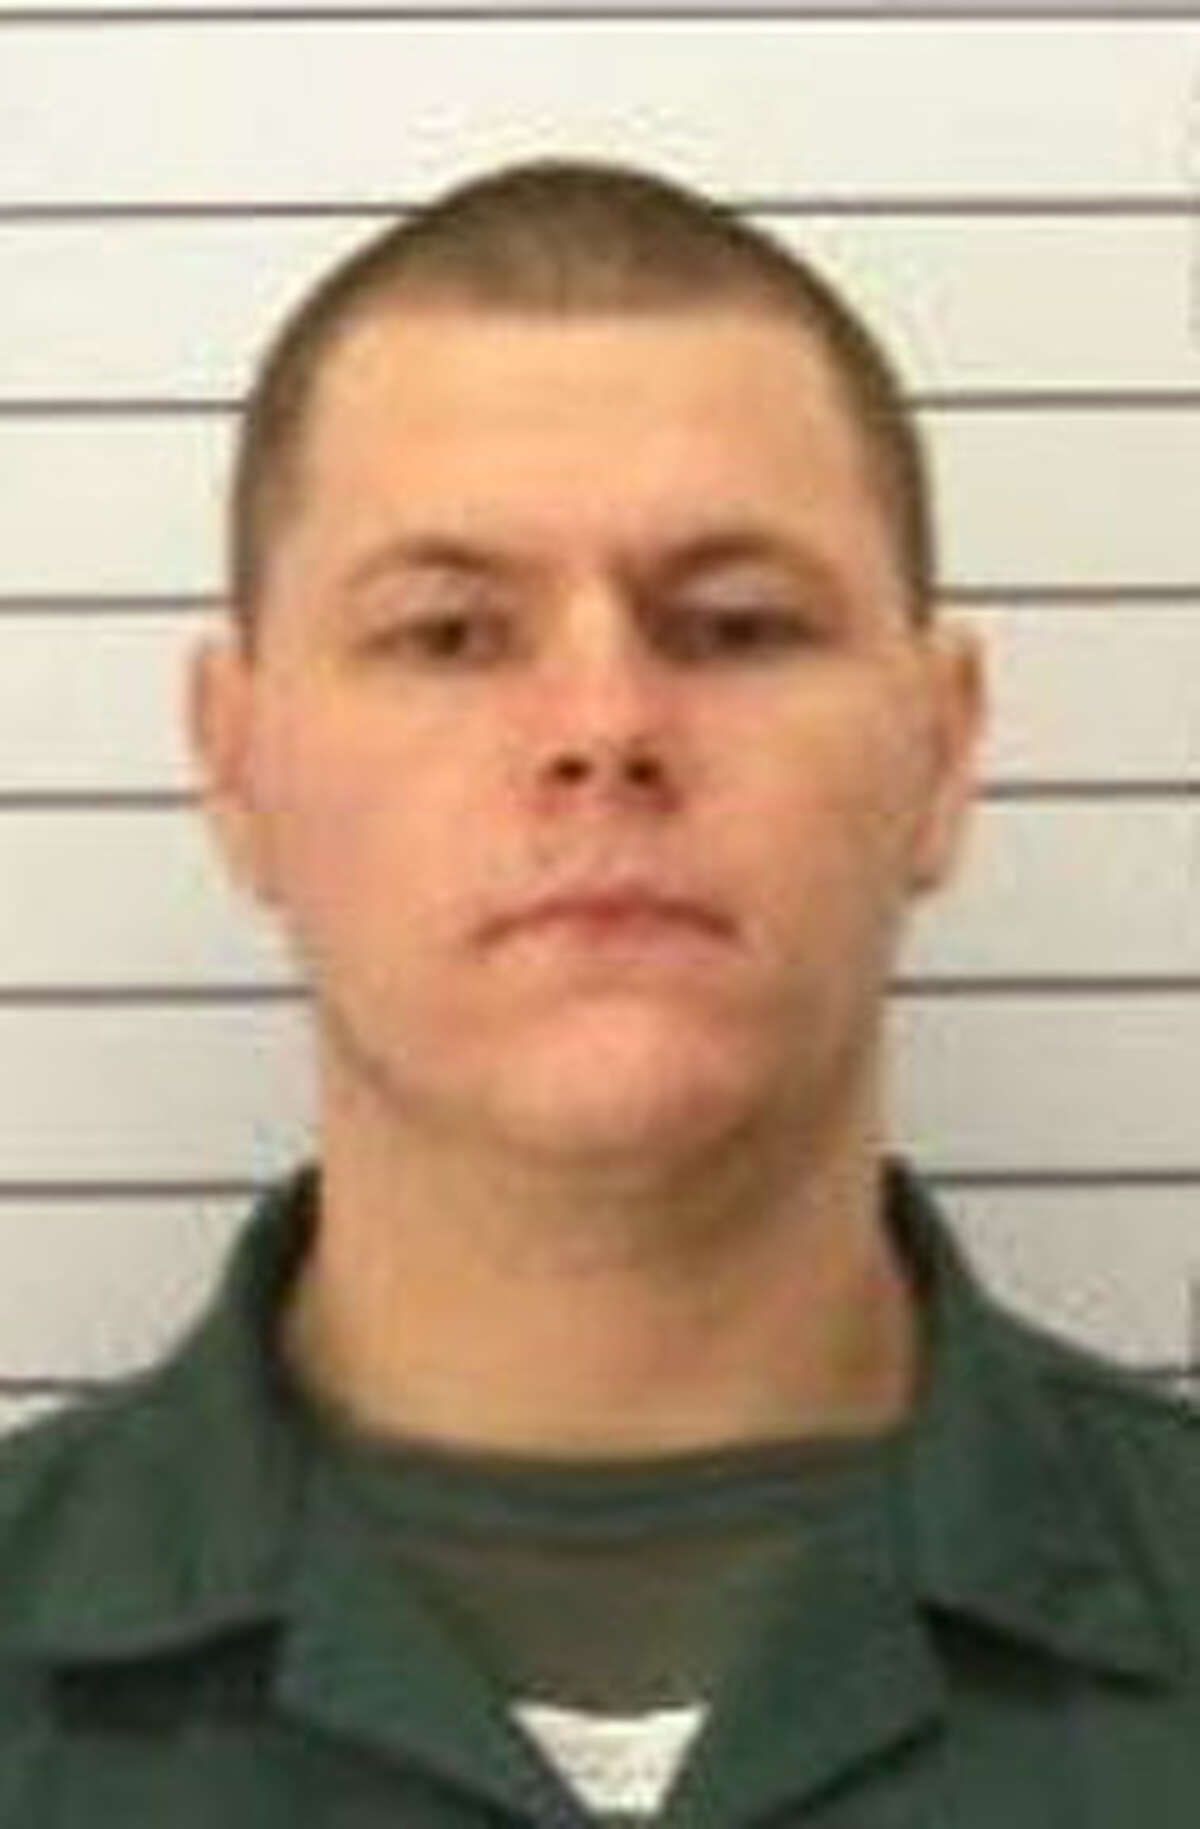 This undated photo from the New York State Department of Corrections shows Matthew Slocum, who is now charged with three counts of second-degree murder and two counts of arson after a fire in White Creek Wednesday. (Associated Press/State Department of Corrections and Community Supervision)